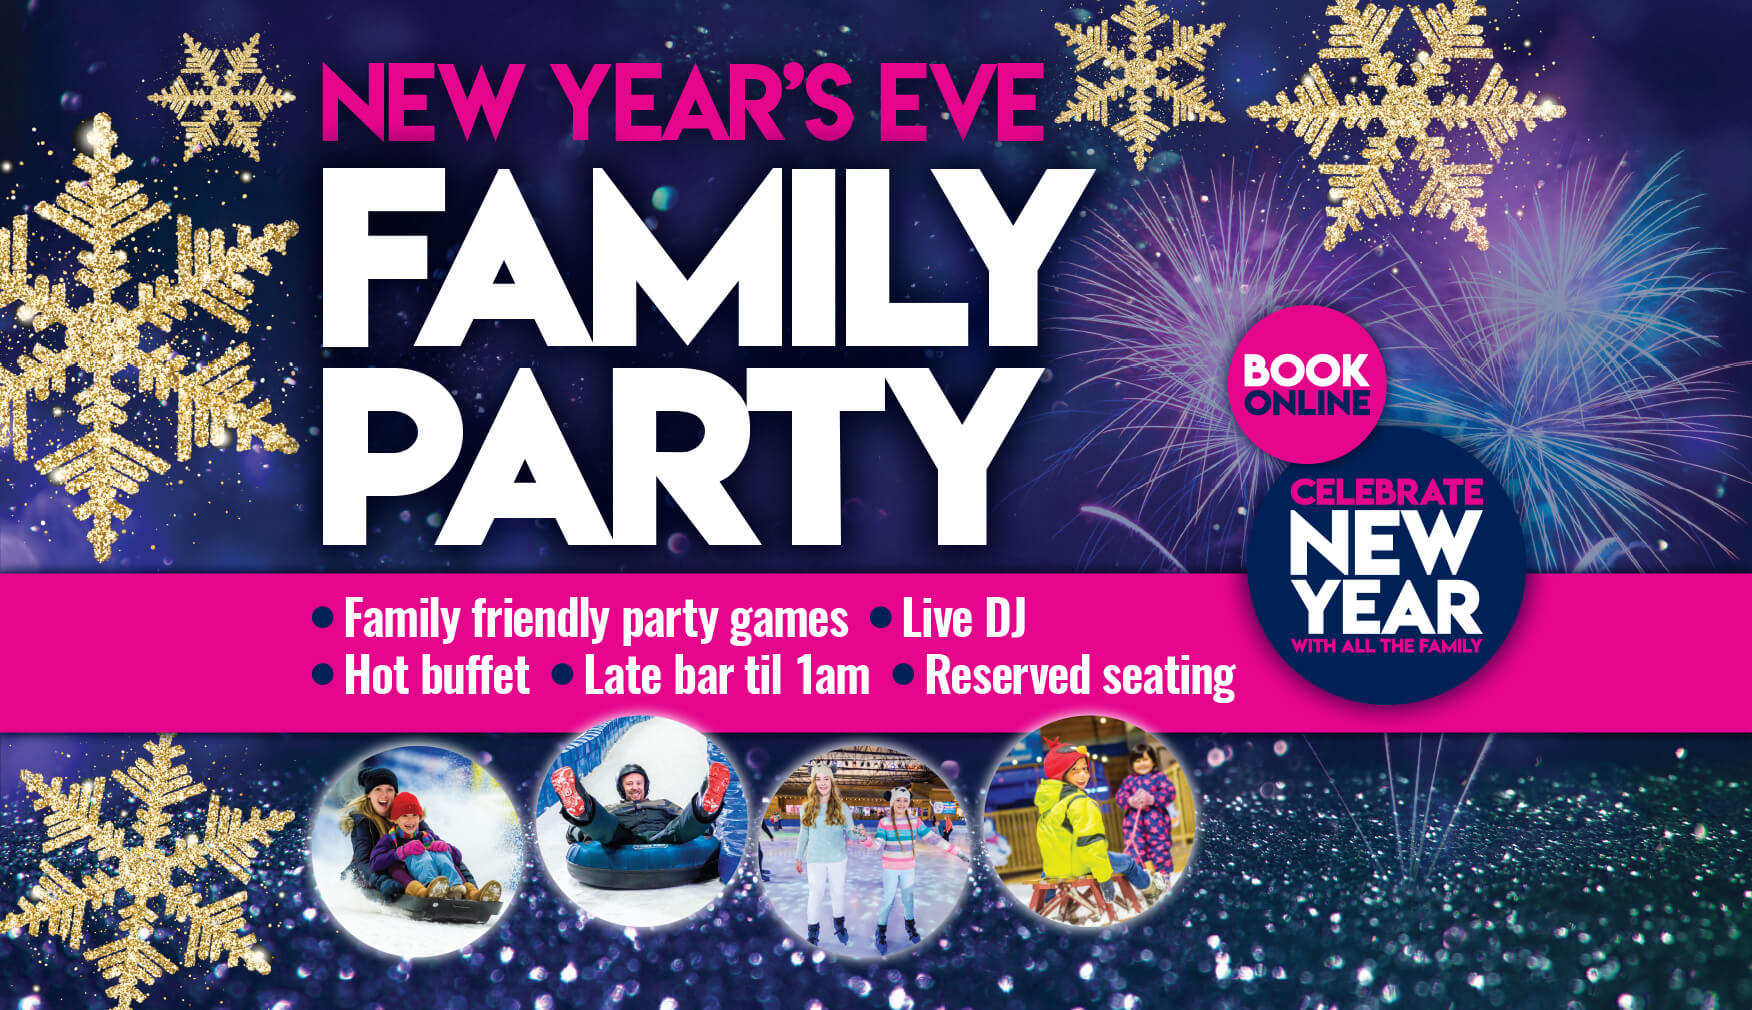 New Years Eve Family Party 2019 SnowDome